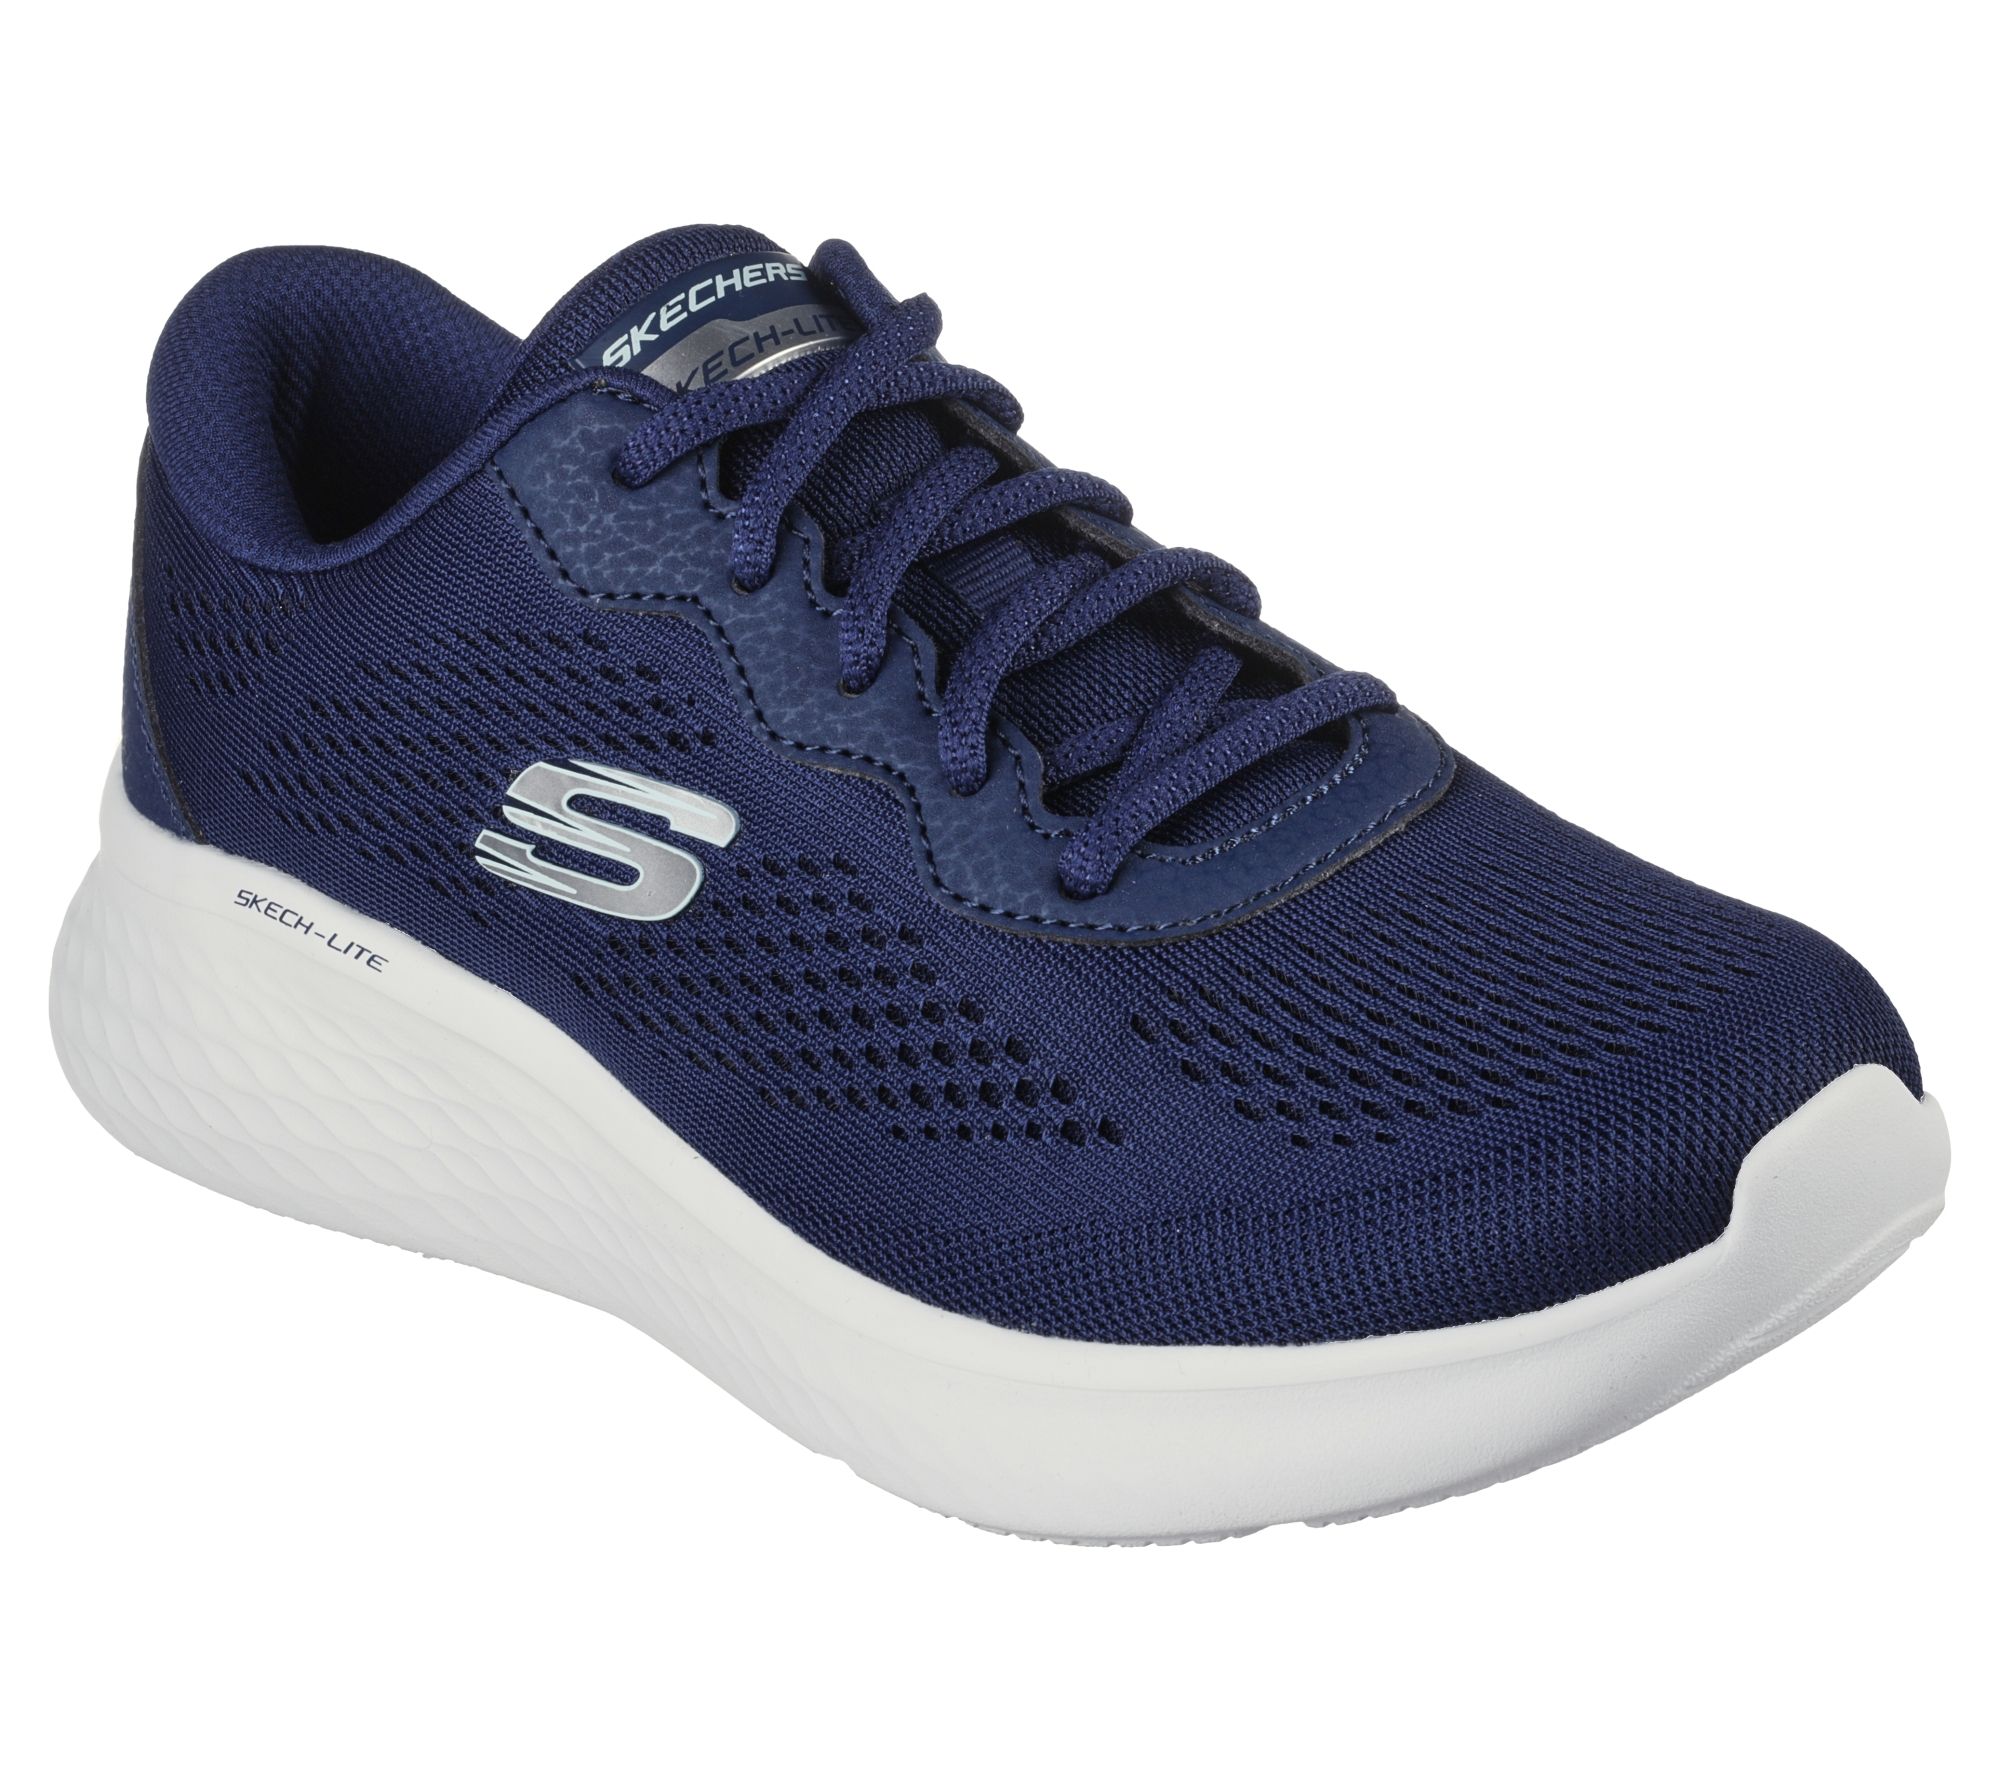 SKECHERS Skech-Lite Pro - Perfect Time 149991 NVY